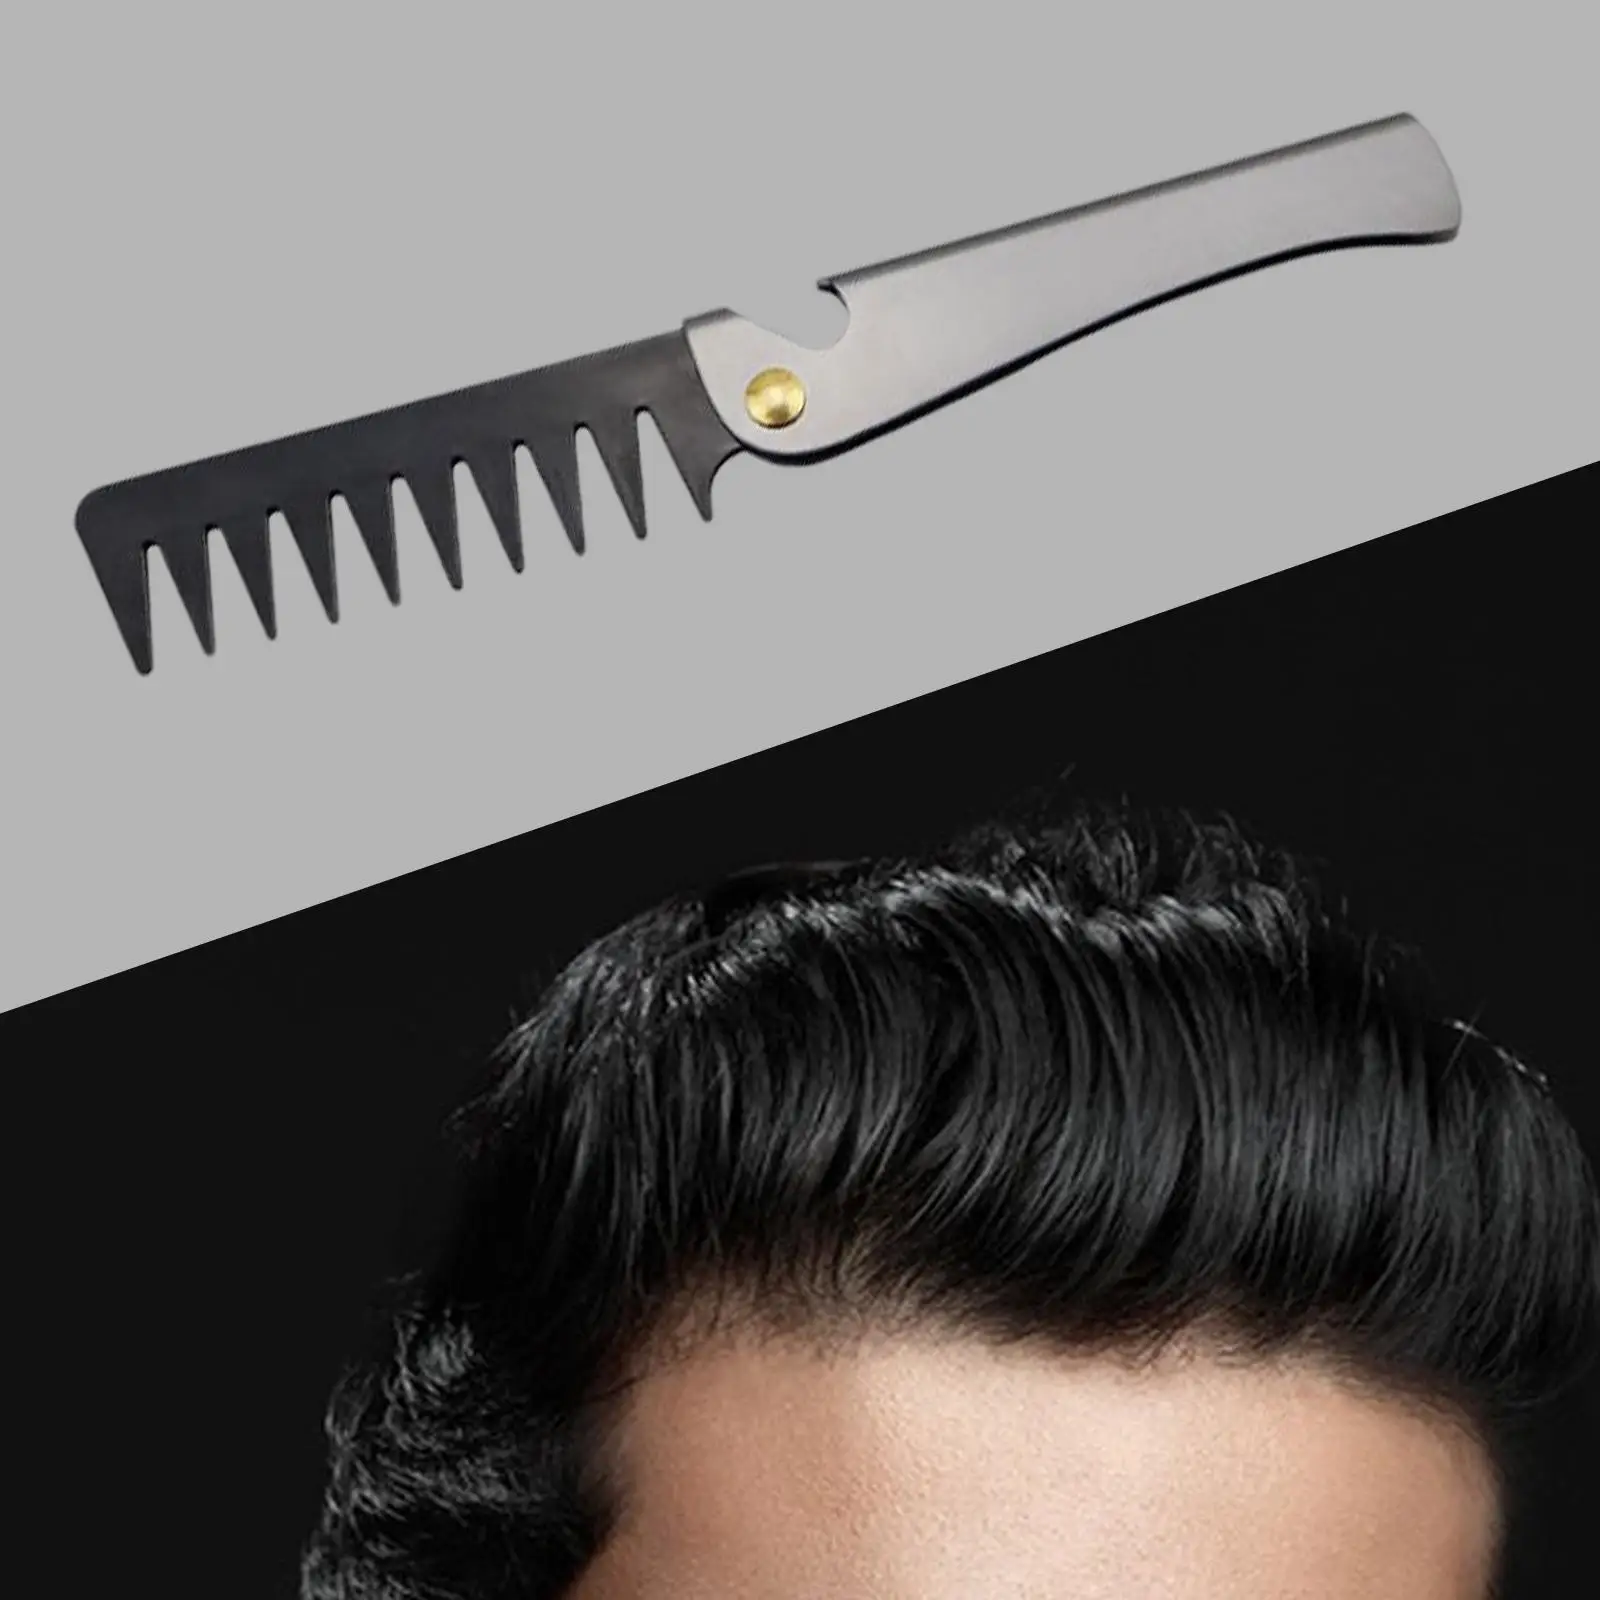 Men Folding Oil Head Comb Use Dry or with Balms and Oils Grooming Combing Hair Multi Use Styling Comb for Beauty Salon Travel